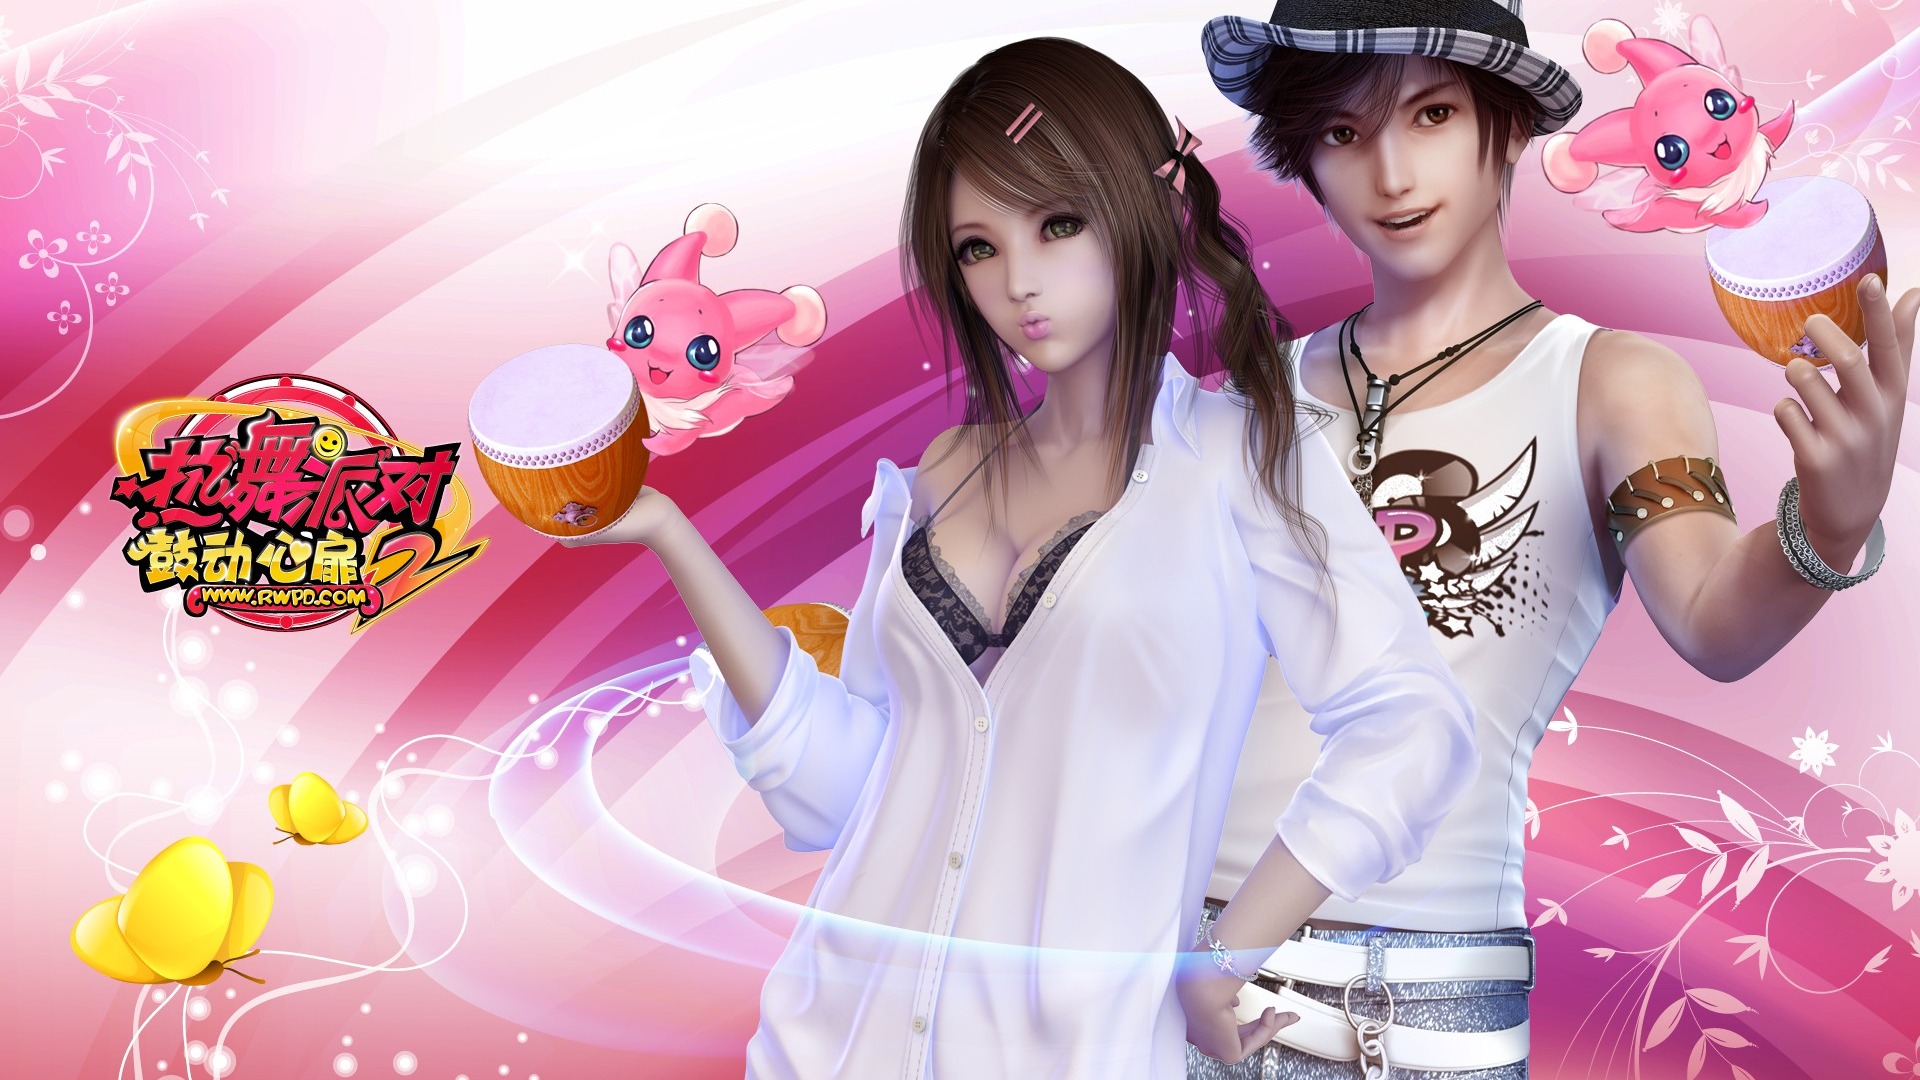 Online game Hot Dance Party II official wallpapers #21 - 1920x1080